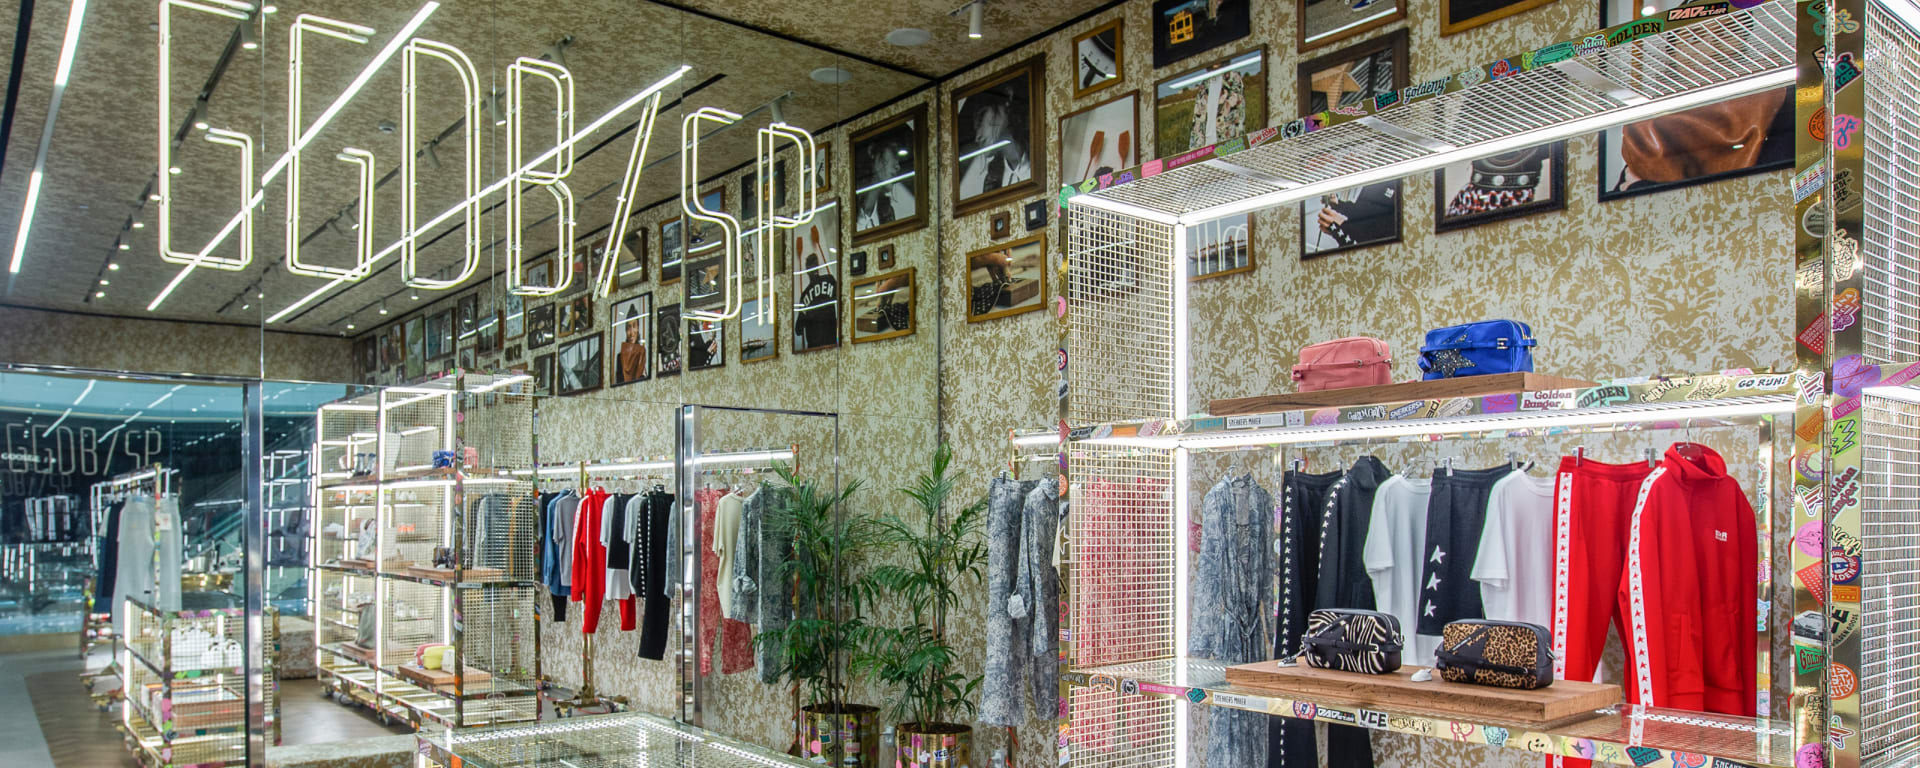 Golden Goose SAN PAOLO FLAGSHIP STORE 3 of 3